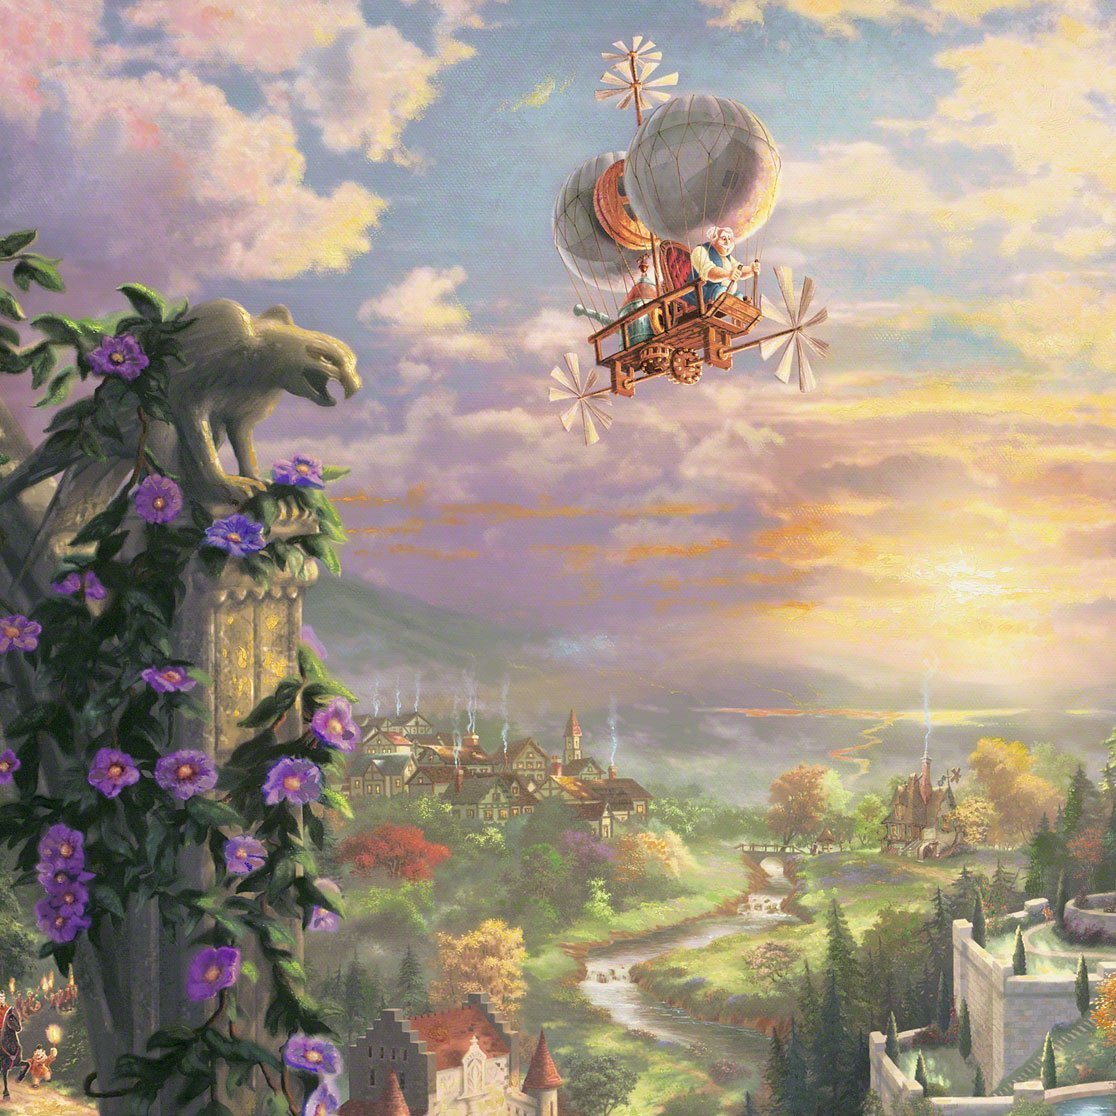 Thom used his creativity to dream up a flying machine that he imagined as being an invention of Belle’s father Maurice - closeup